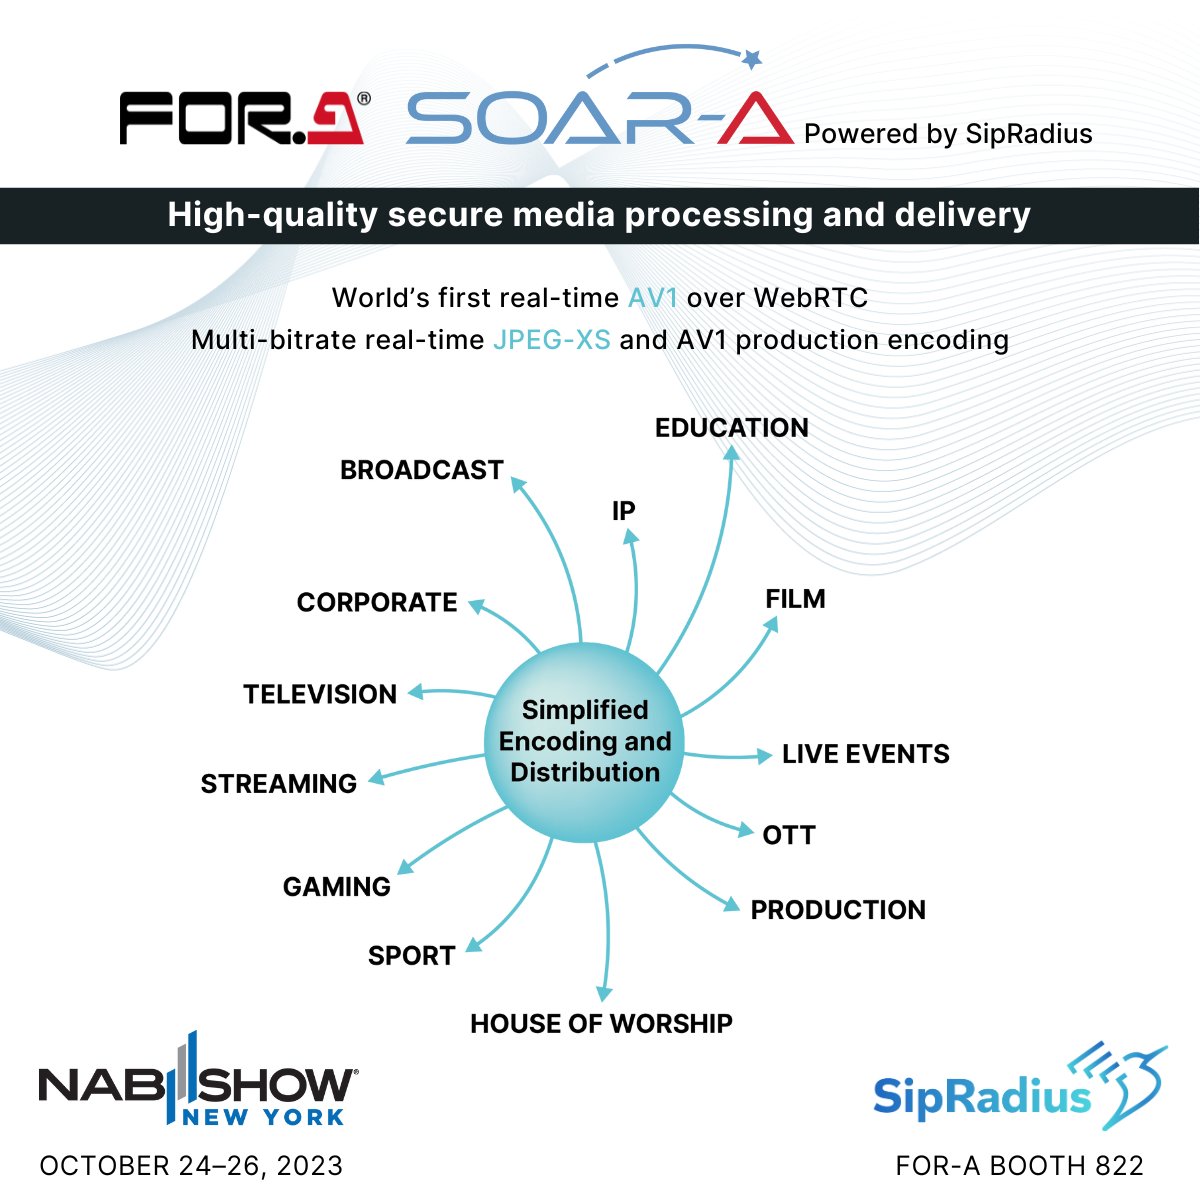 “This is our first opportunity to exhibit at @NABShow New York, and we look forward to showing visitors the benefits of our involvement with @foracorporation.” Read more from Sergio Ammirata here and stop by Booth 822 to see SOAR-A in action: bit.ly/3tRZLhZ #NABSHOWNY